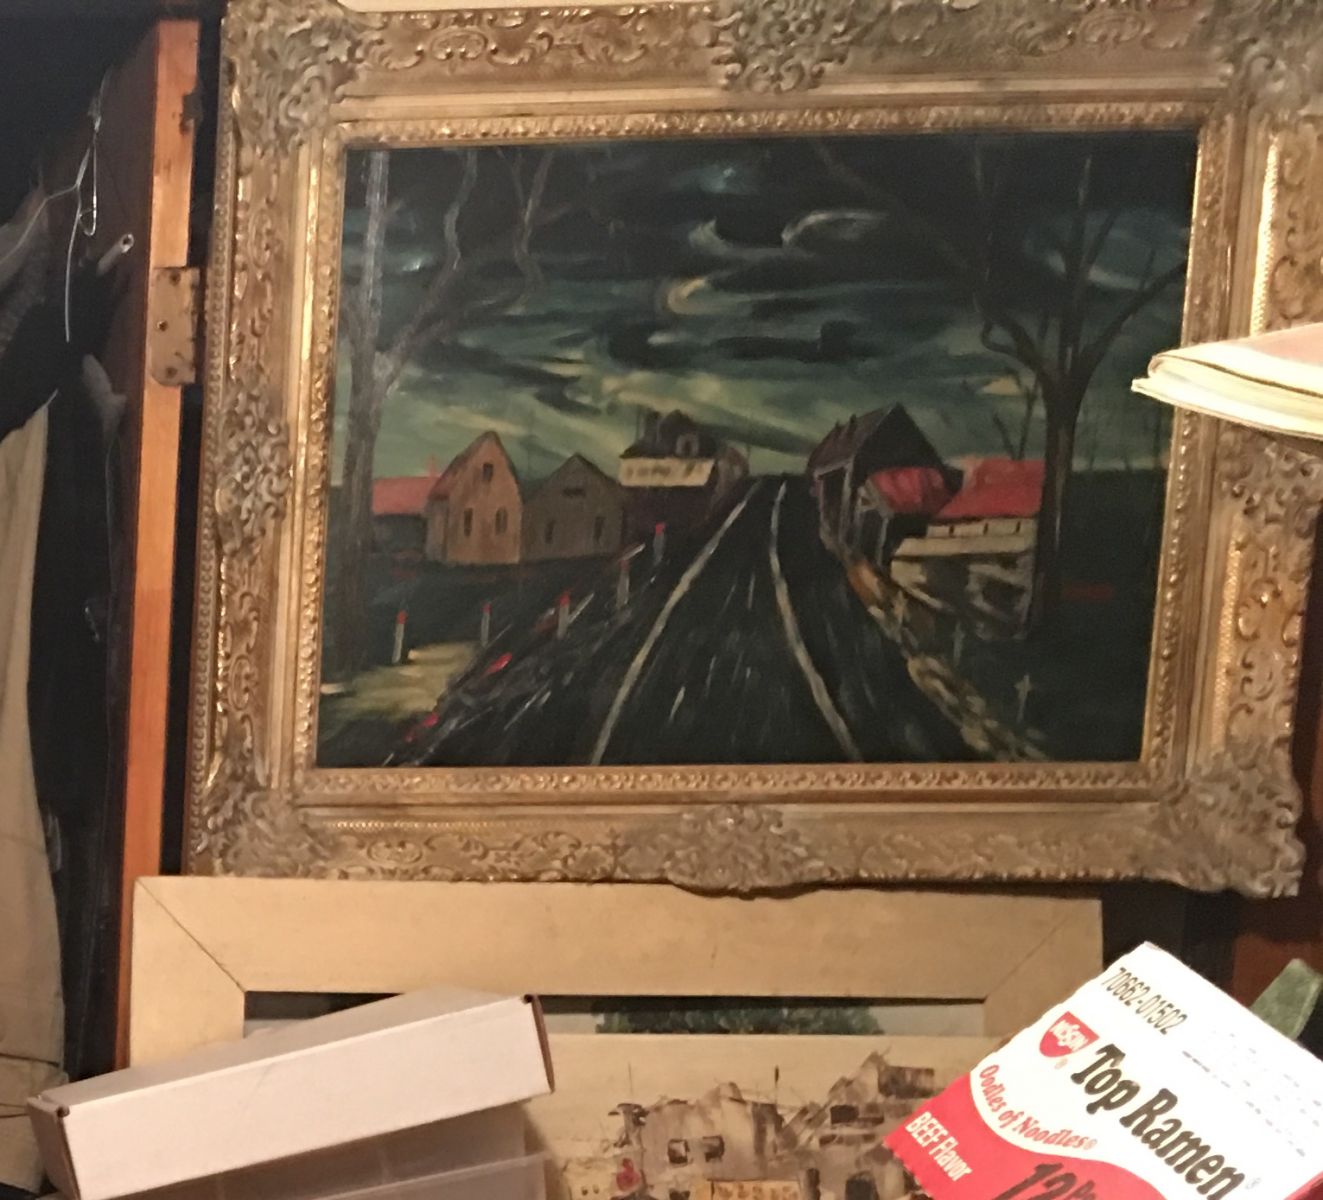 A moody framed landscape oil on canvas painting sits atop other works of art and a box of ramen noodle soup inside this estate.